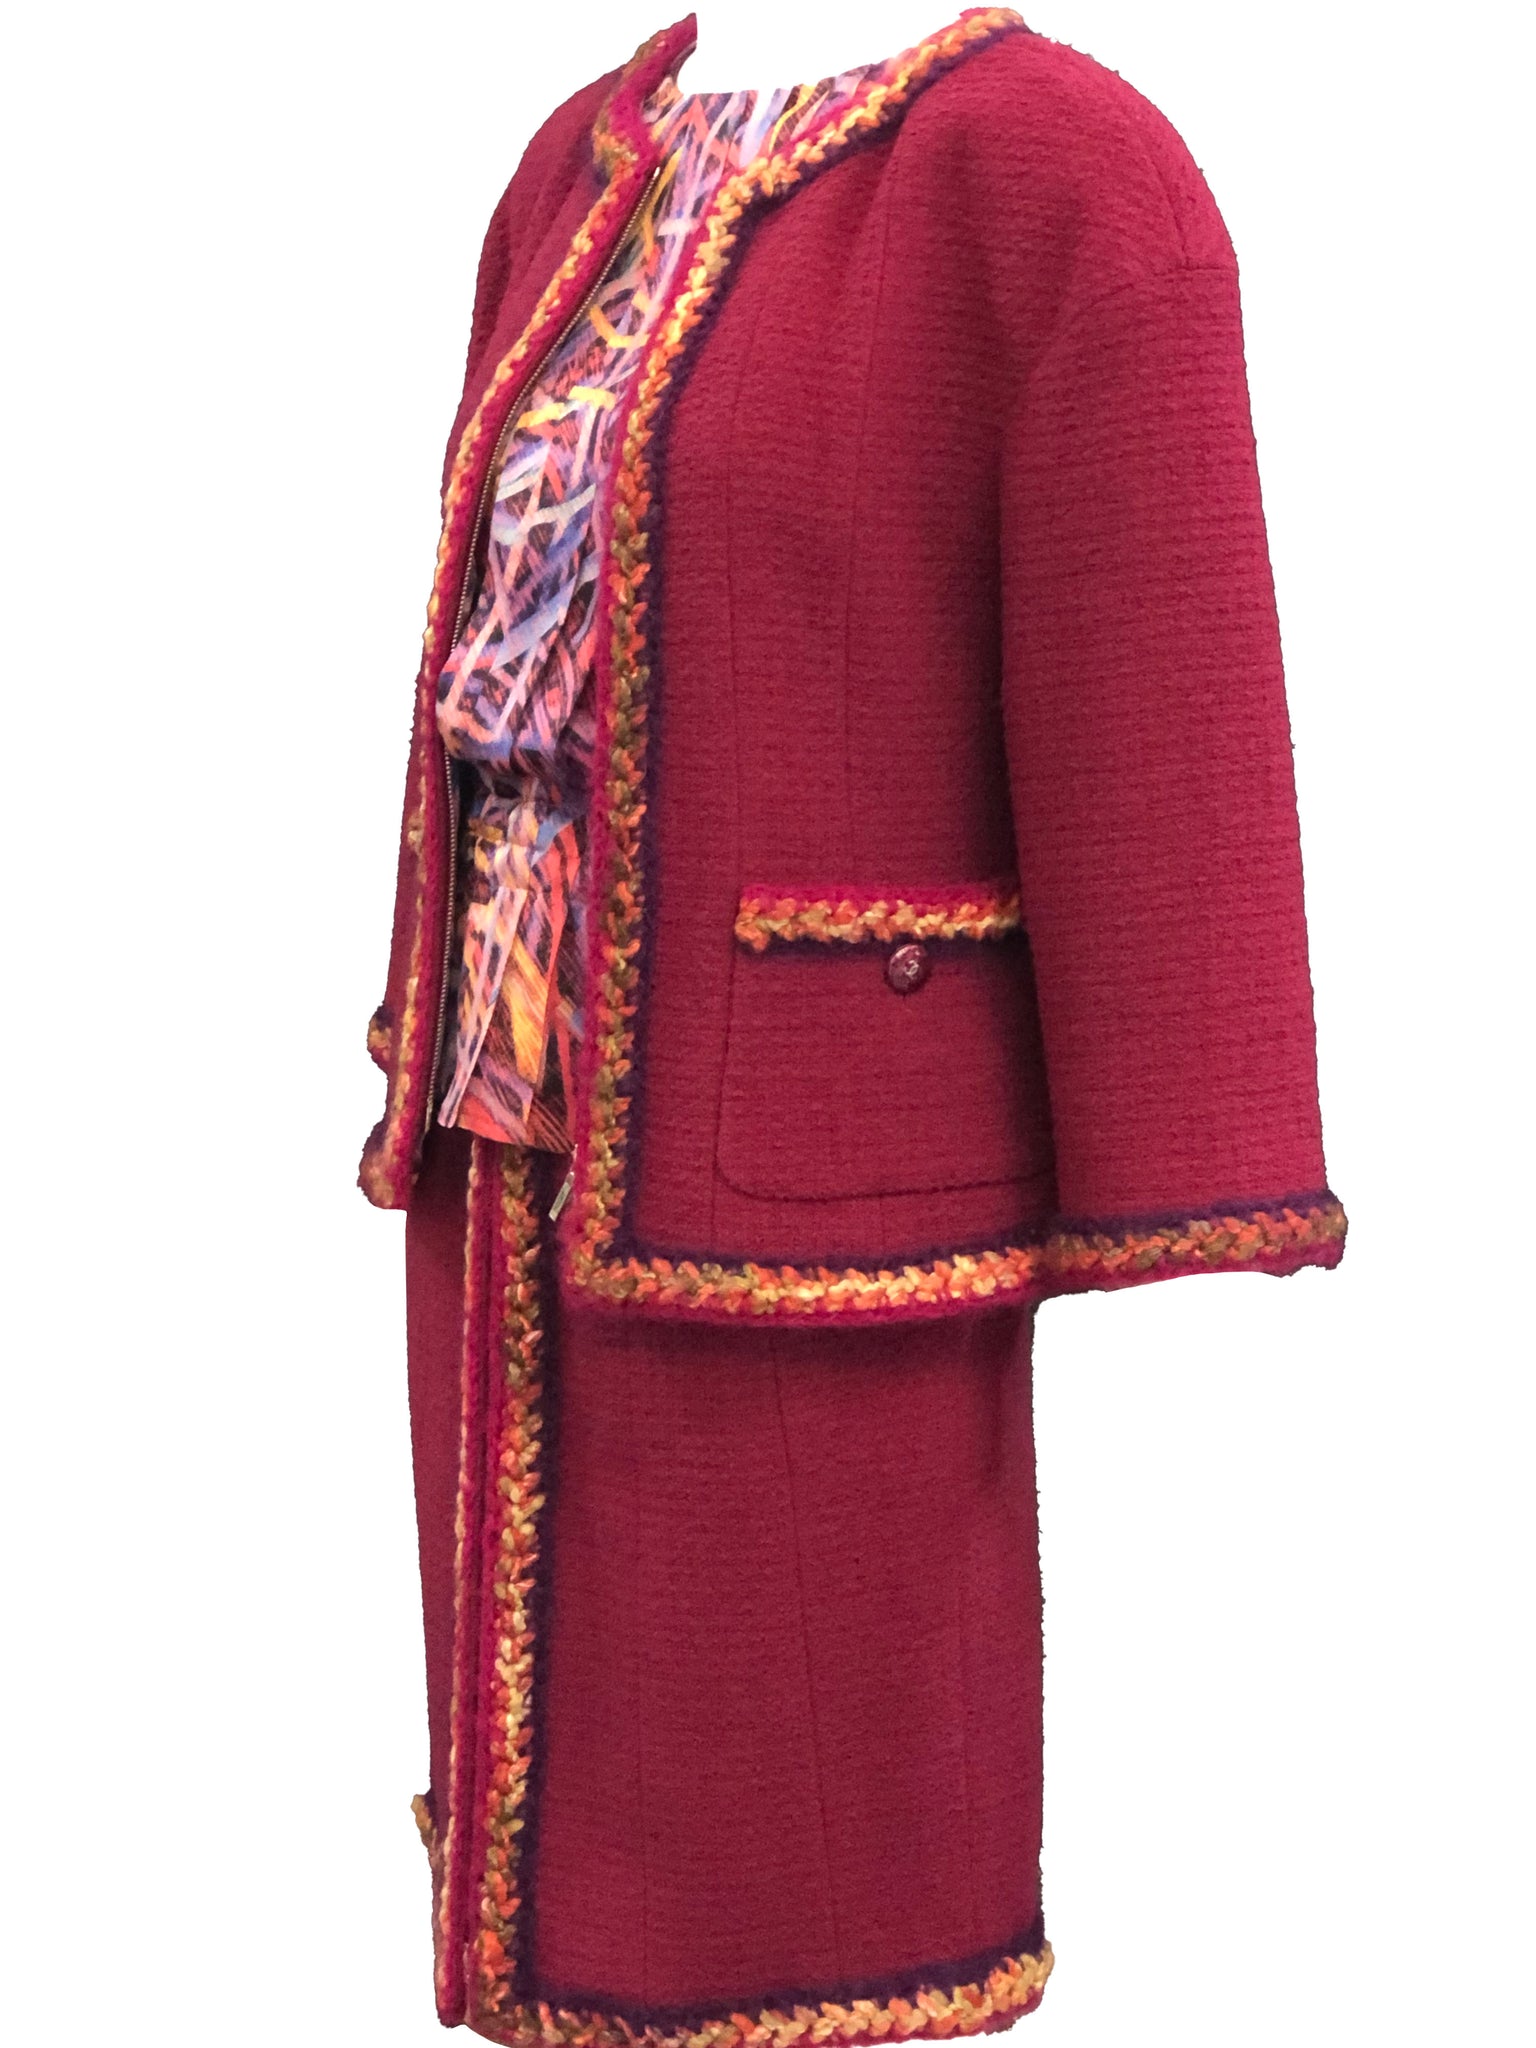 Chanel Contemporary Burgundy Boucle Suit with Matching Blouse